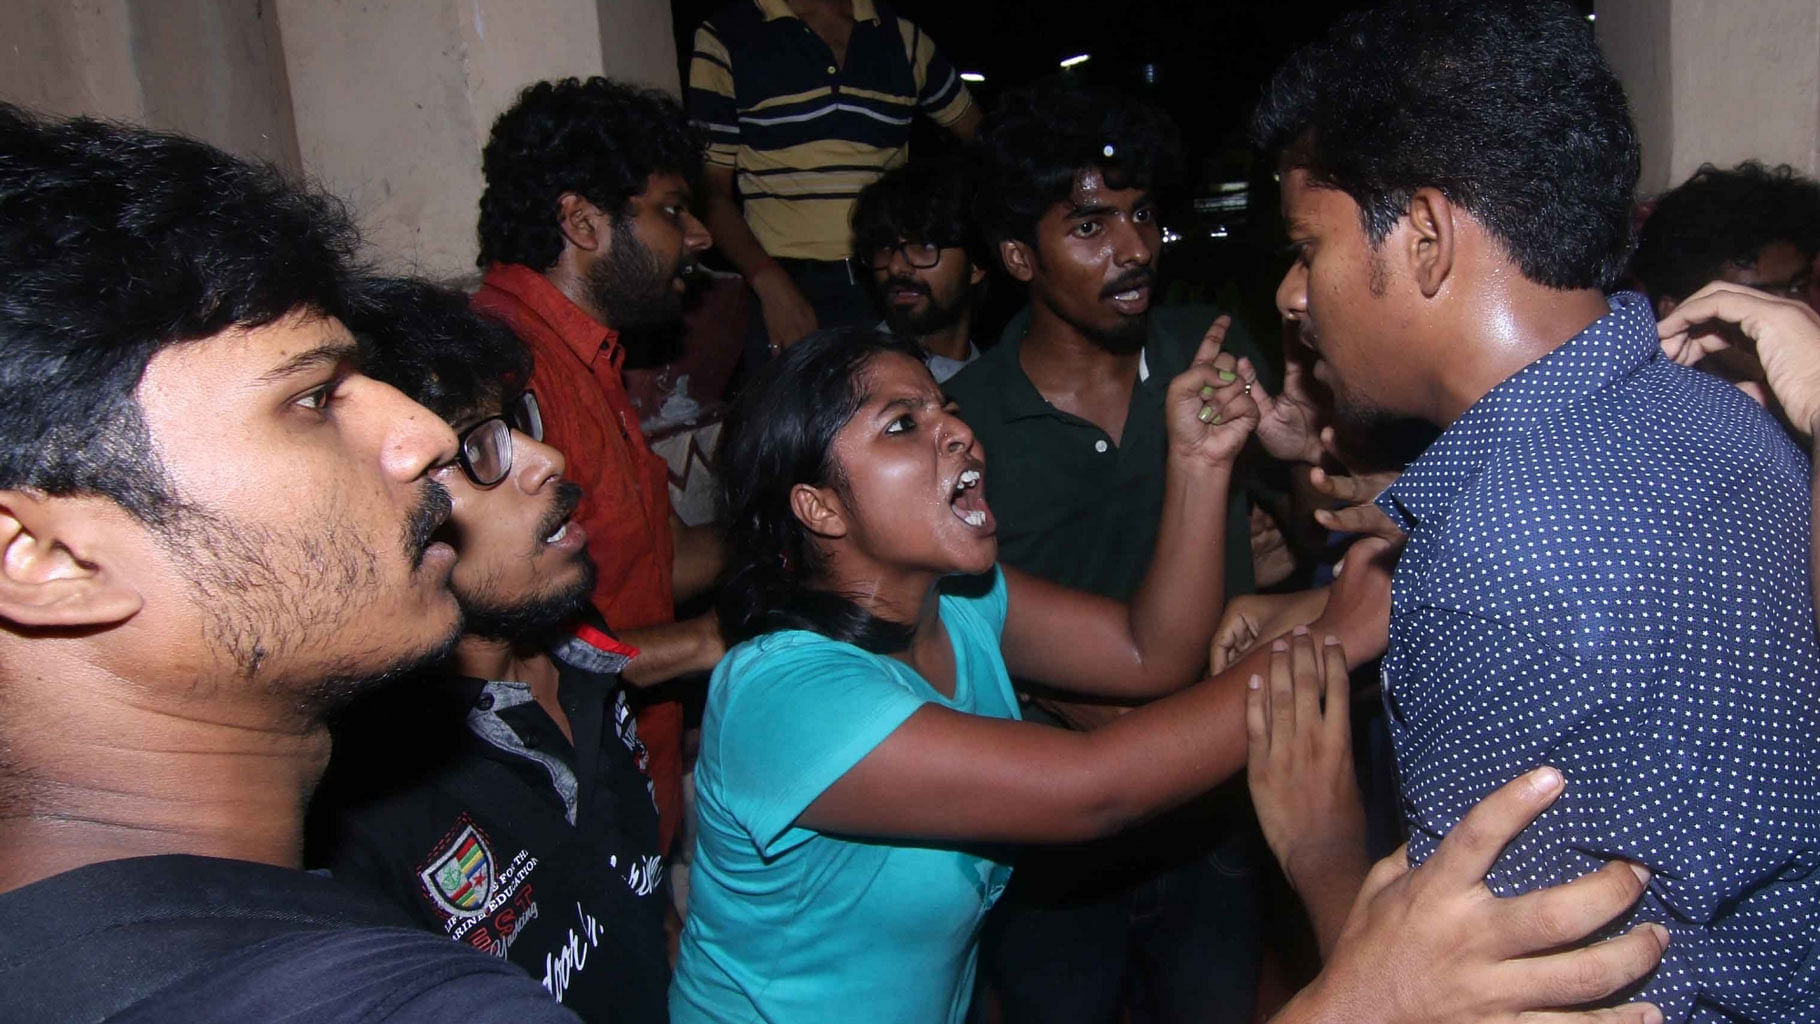  Left and ABVP students clash with each other during screening of the film <i>“Buddha In A Traffic Jam”</i> at Jadavpur University campus in Kolkata on May 6, 2016. (Photo: IANS)